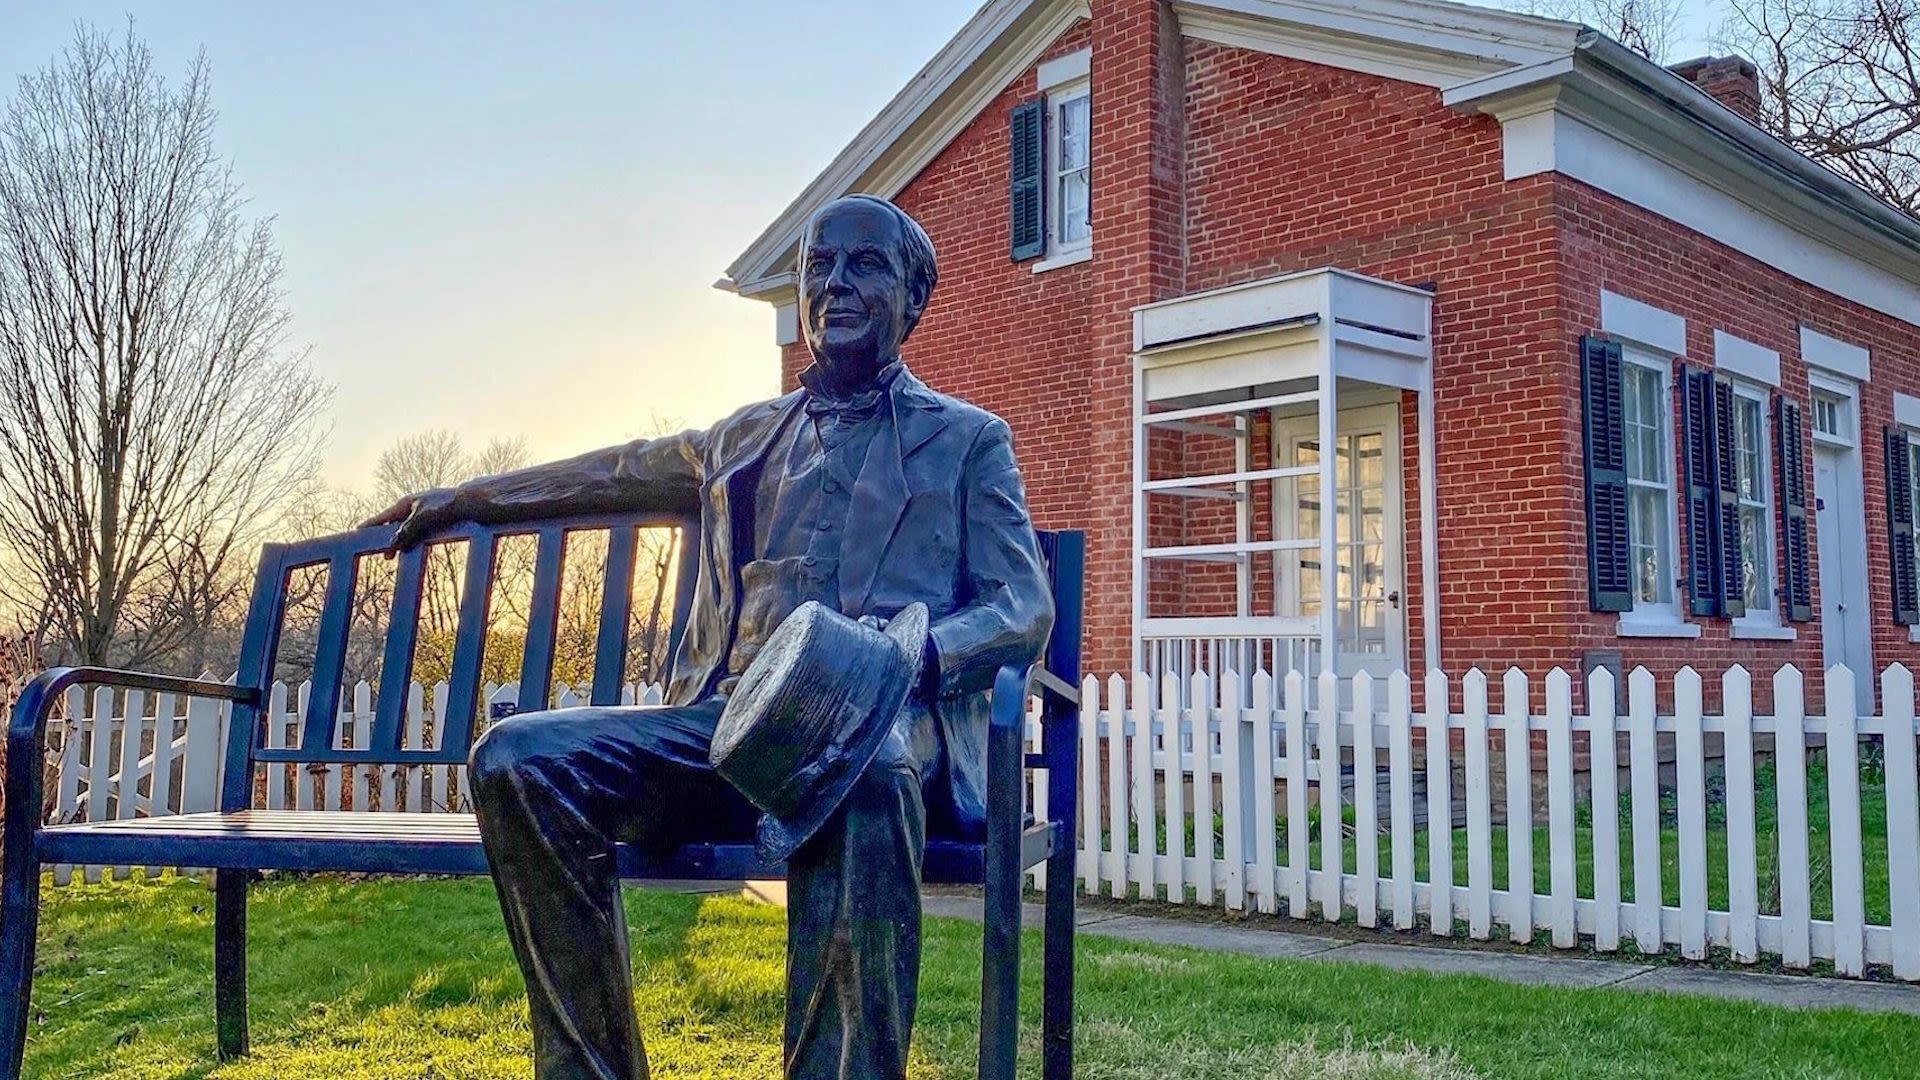 Thomas Edison's birthplace is now home to an incredible, unexpected modern renovation: 'We are not only embracing sustainability but also enriching the story of electricity'